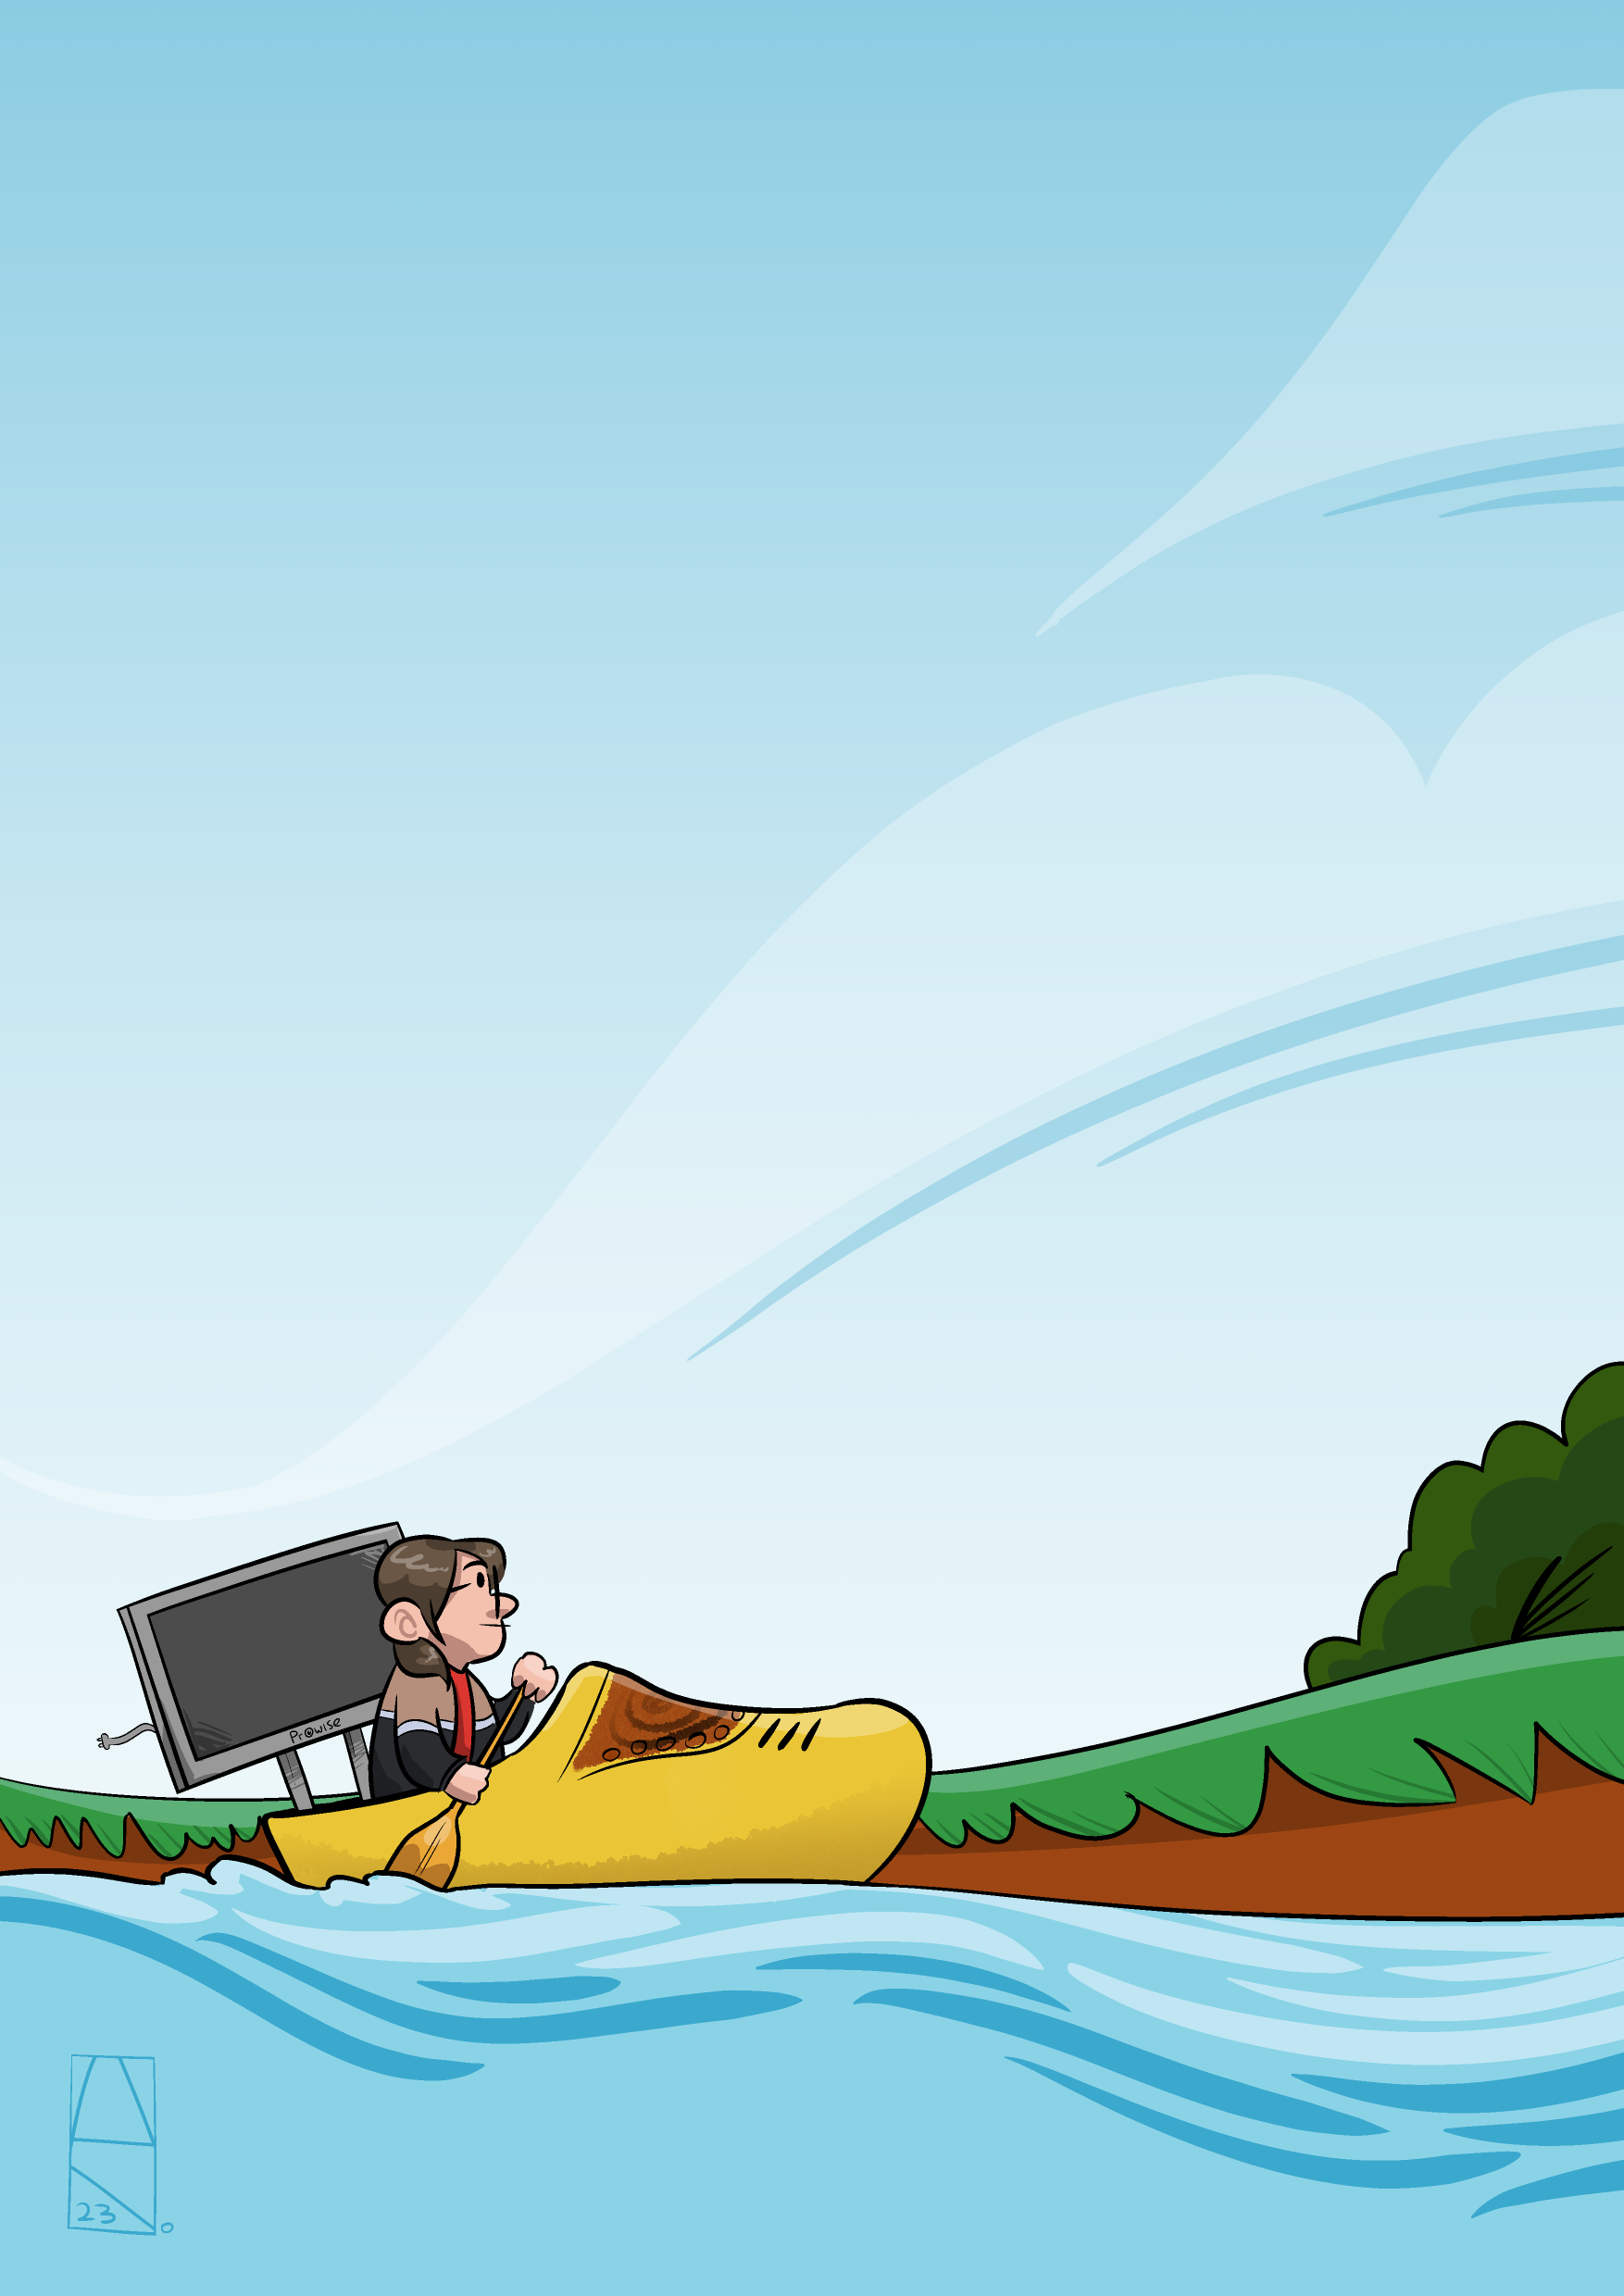 A digital illustration of me, paddling down a body of water in a big clog. In the back of the clog is a "smart whiteboard" style school screen.